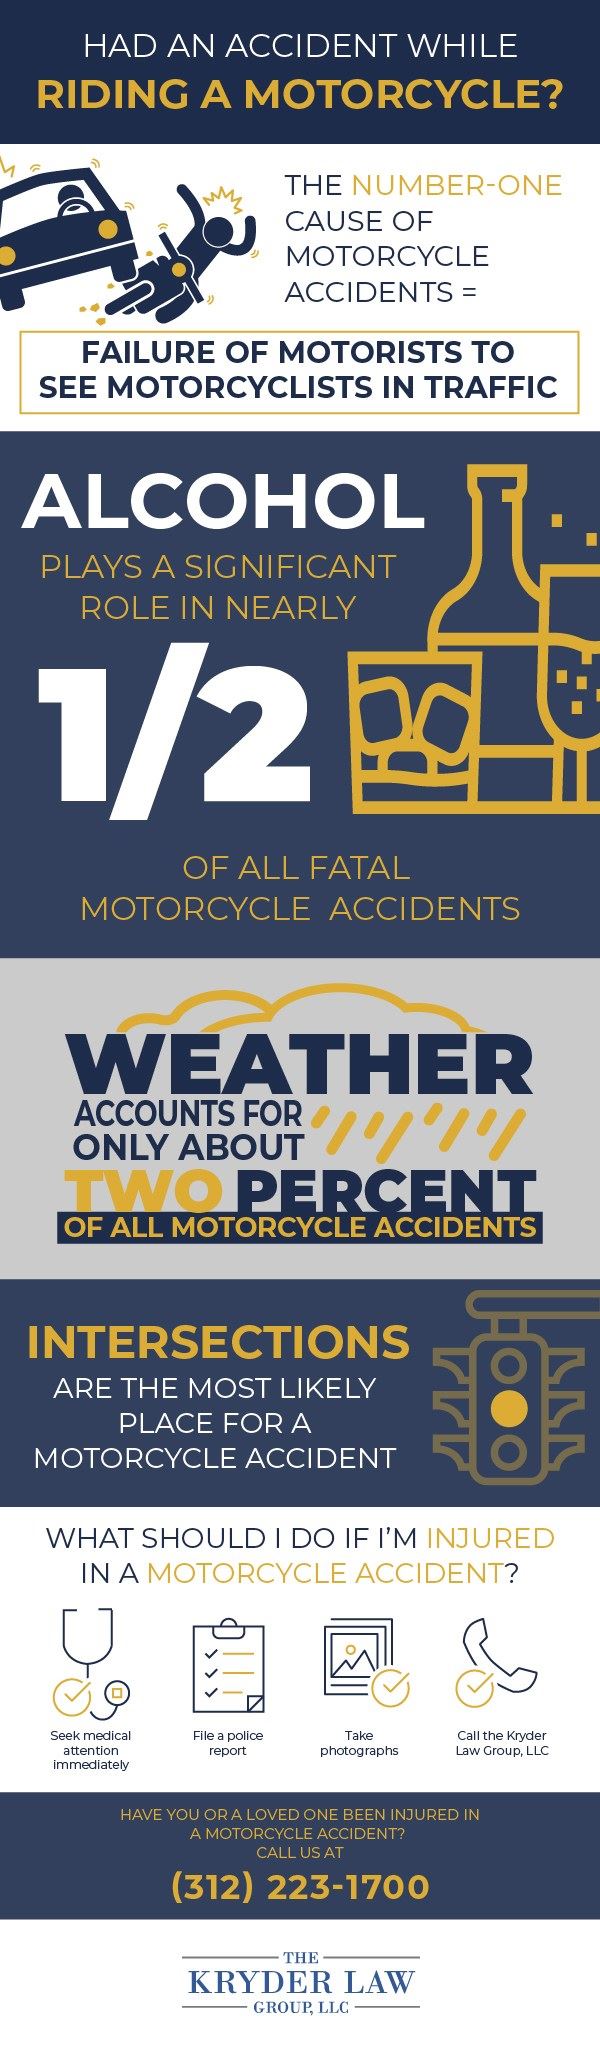 Motorcycle Accident Infographic